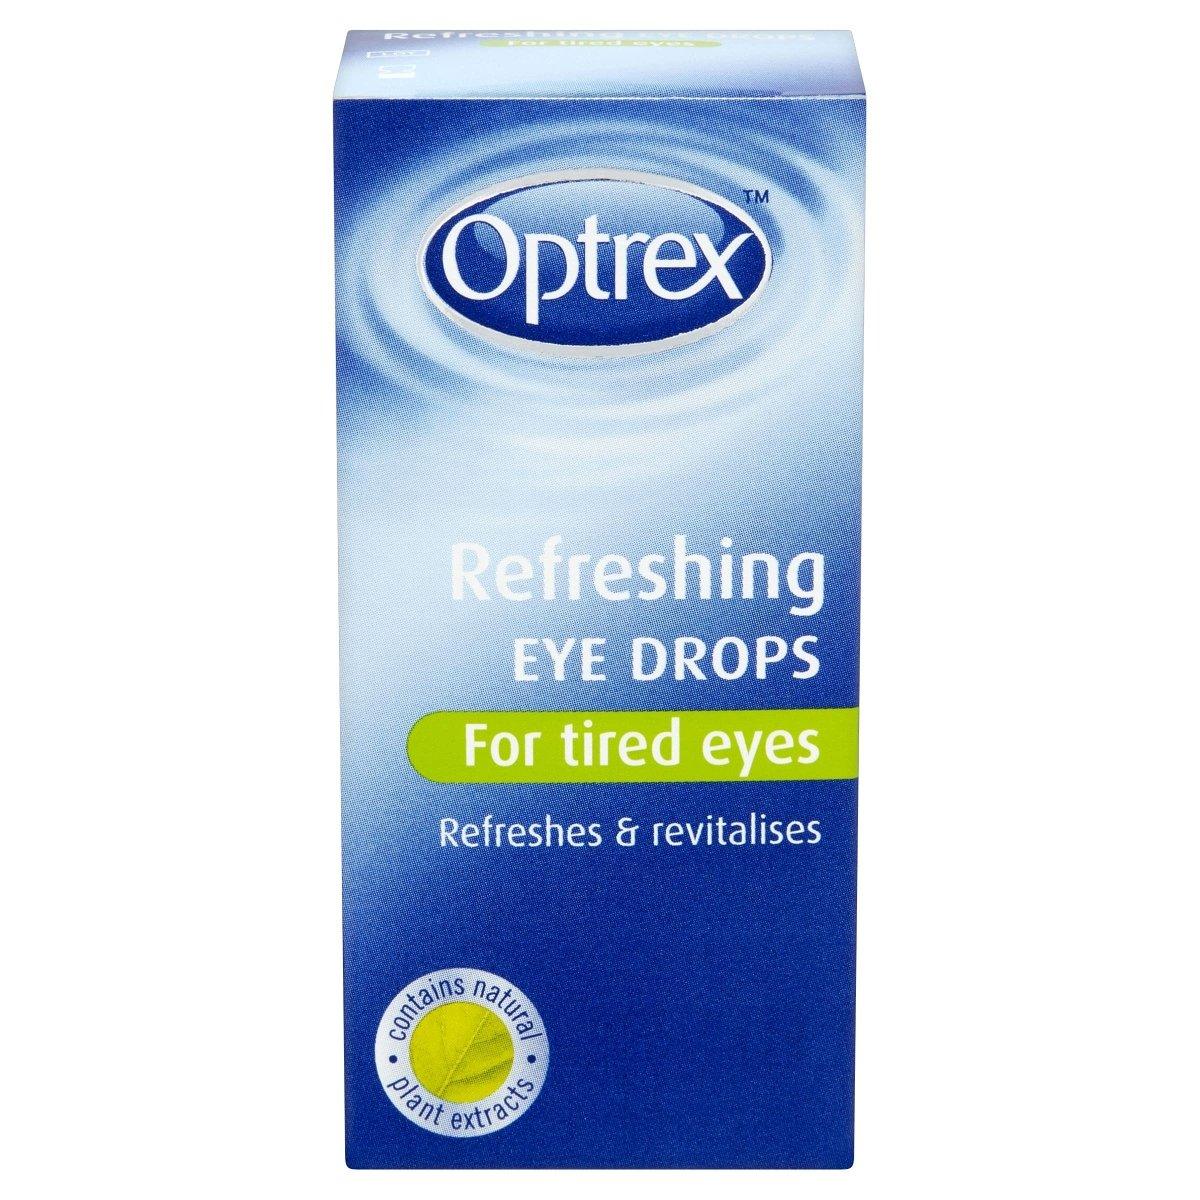 Optrex for Tired Eyes - Rightangled